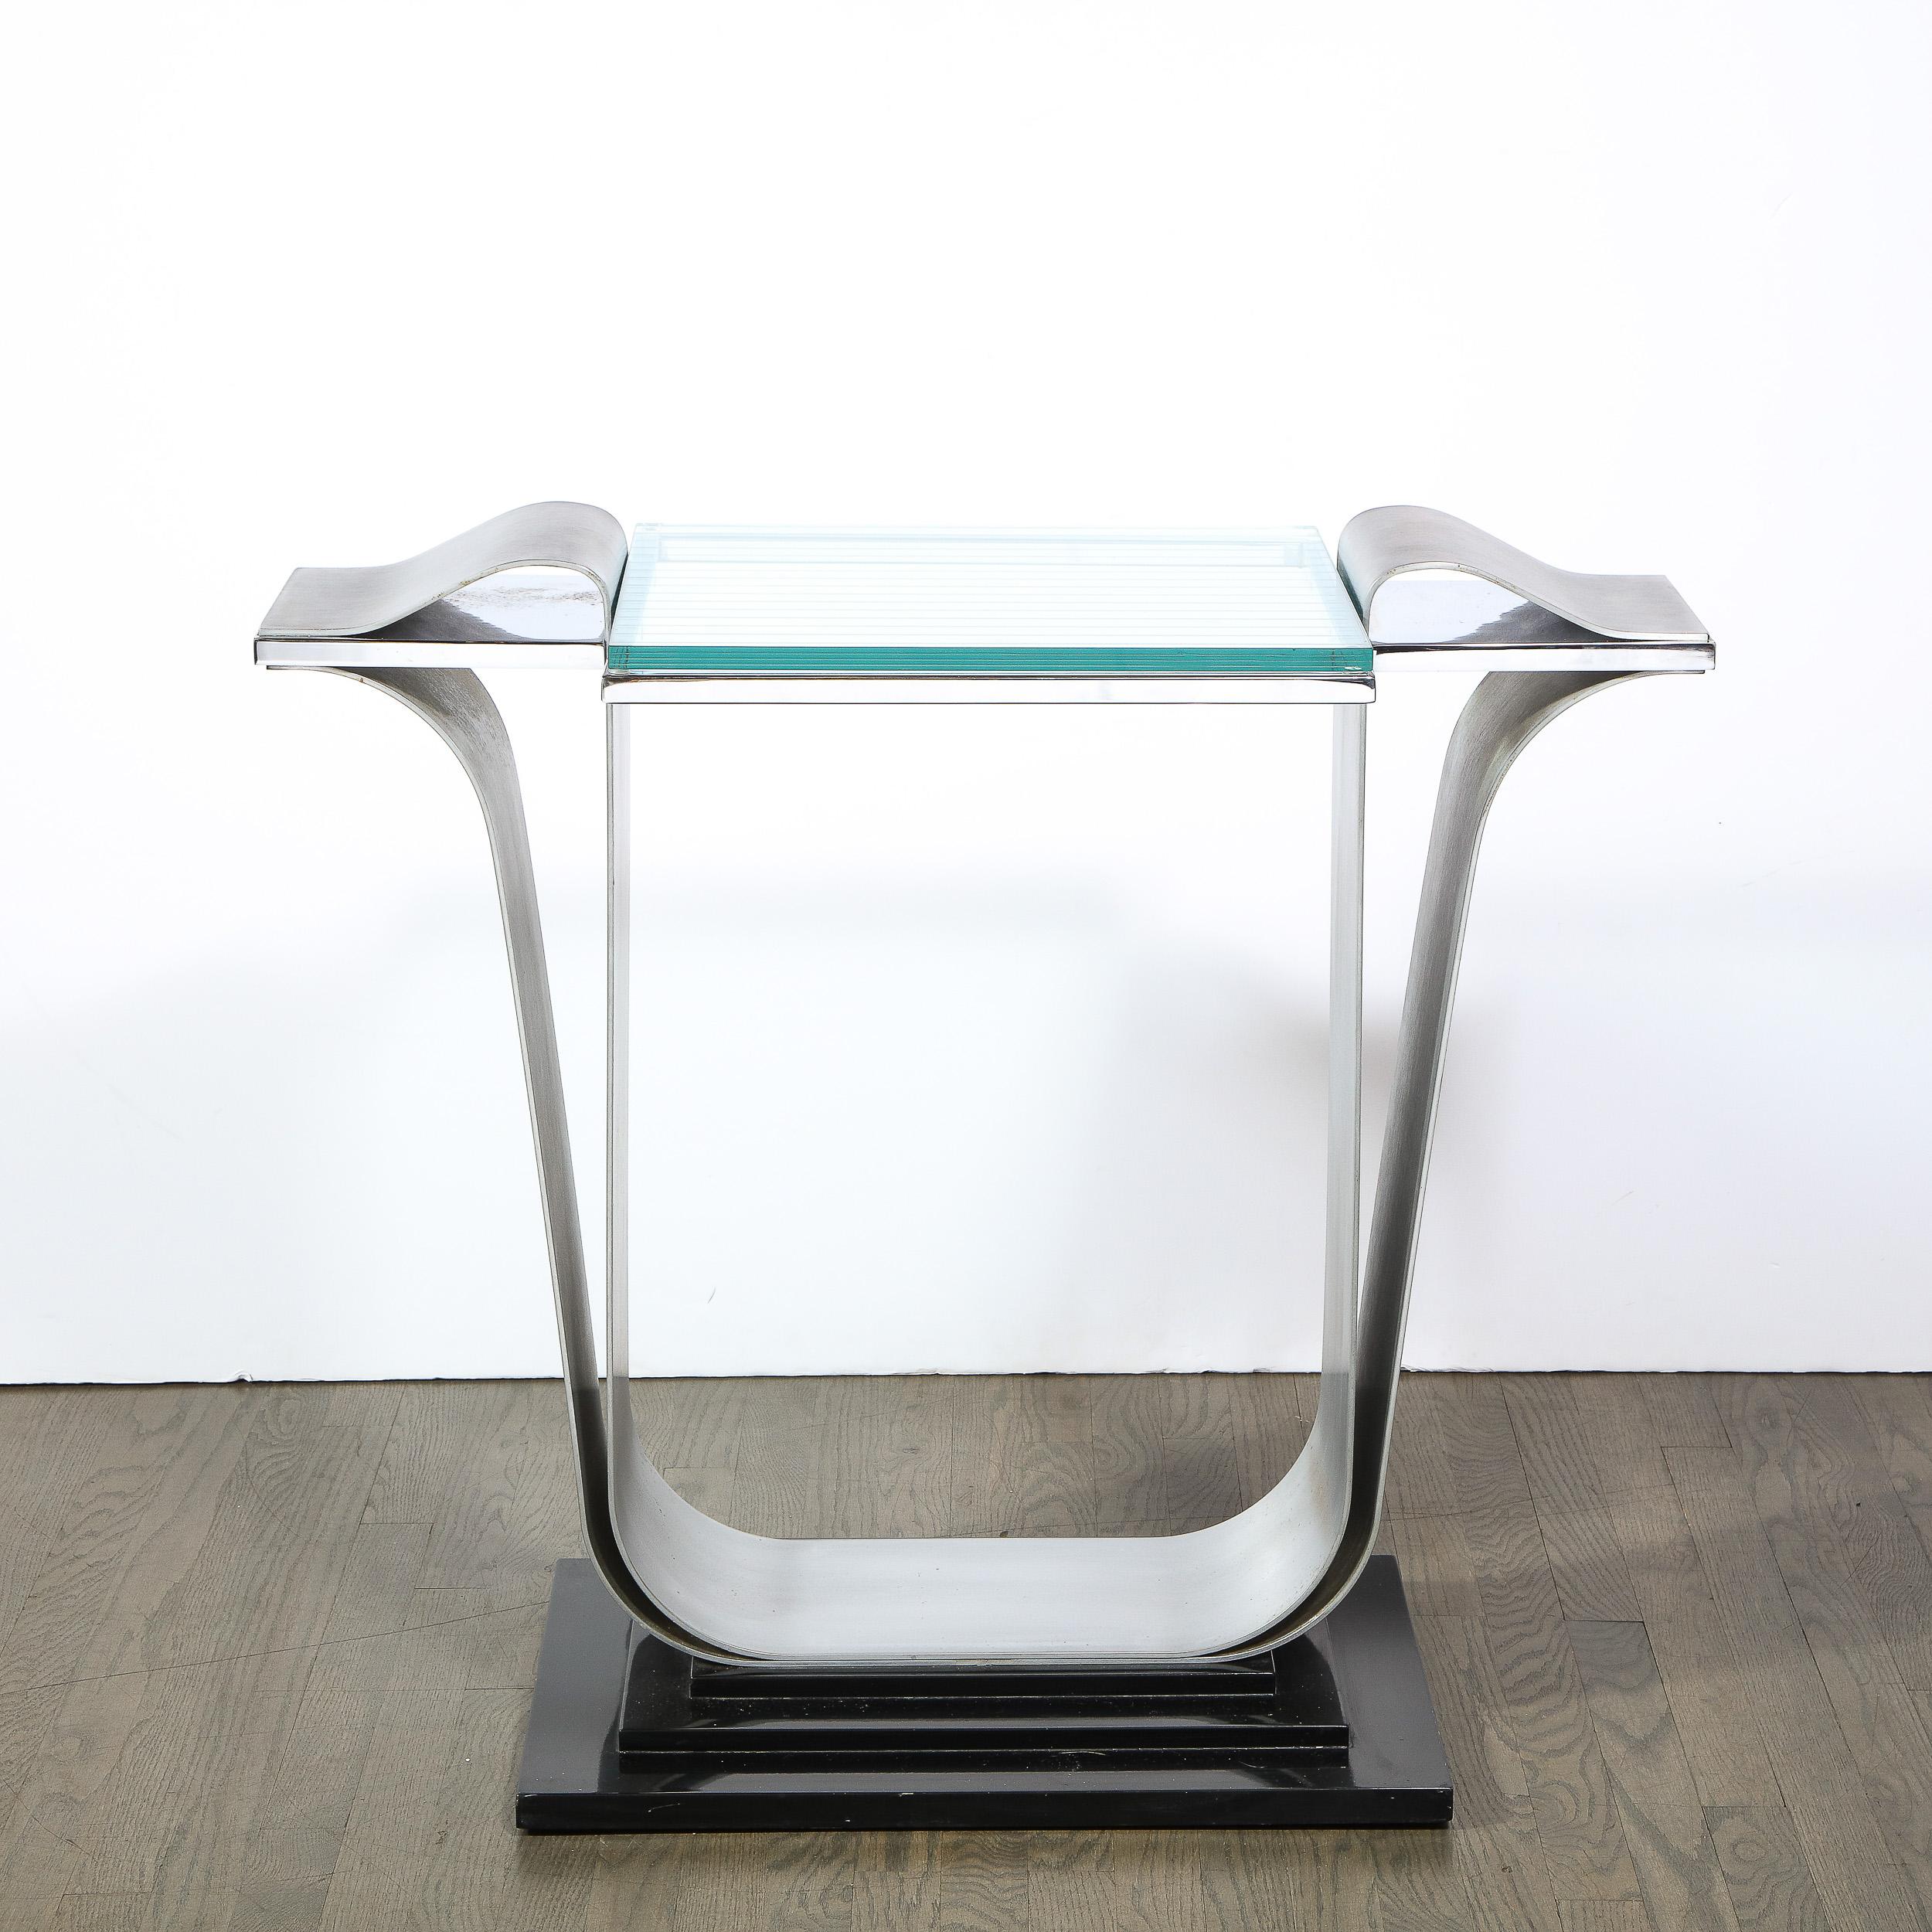 This elegant and dynamic Art Deco revival console table was realized in the United States circa 1080. Sitting on a black lacquer skyscraper style stand the console is support by two undulating stylized s-form supports that curve under the glass